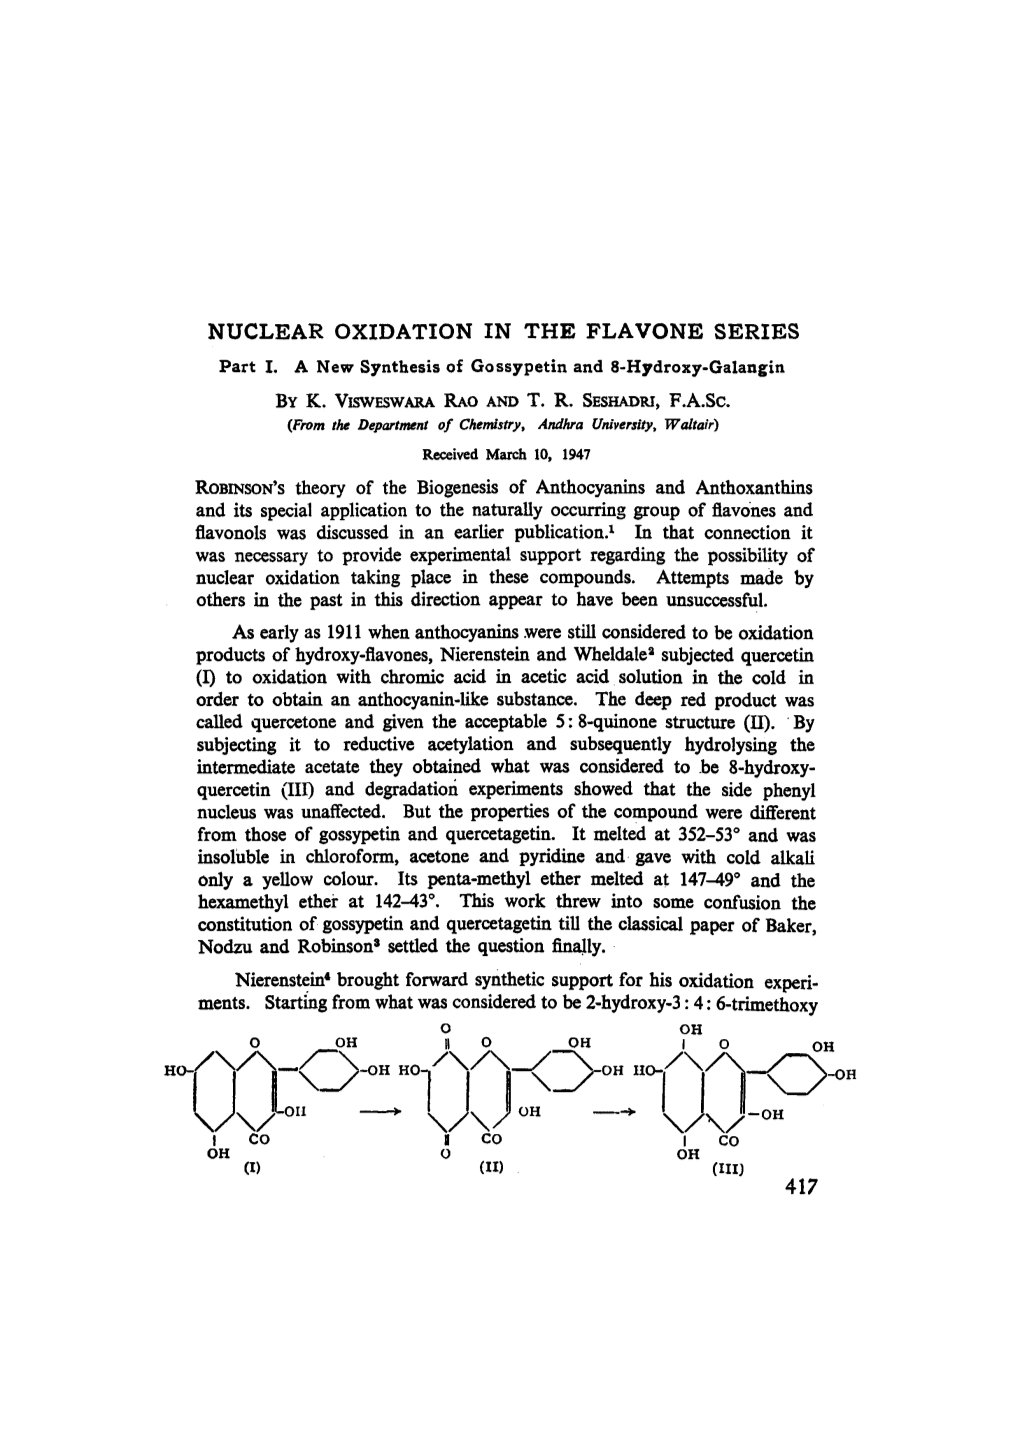 NUCLEAR OXIDATION in the FLAVONE SERIES Part I